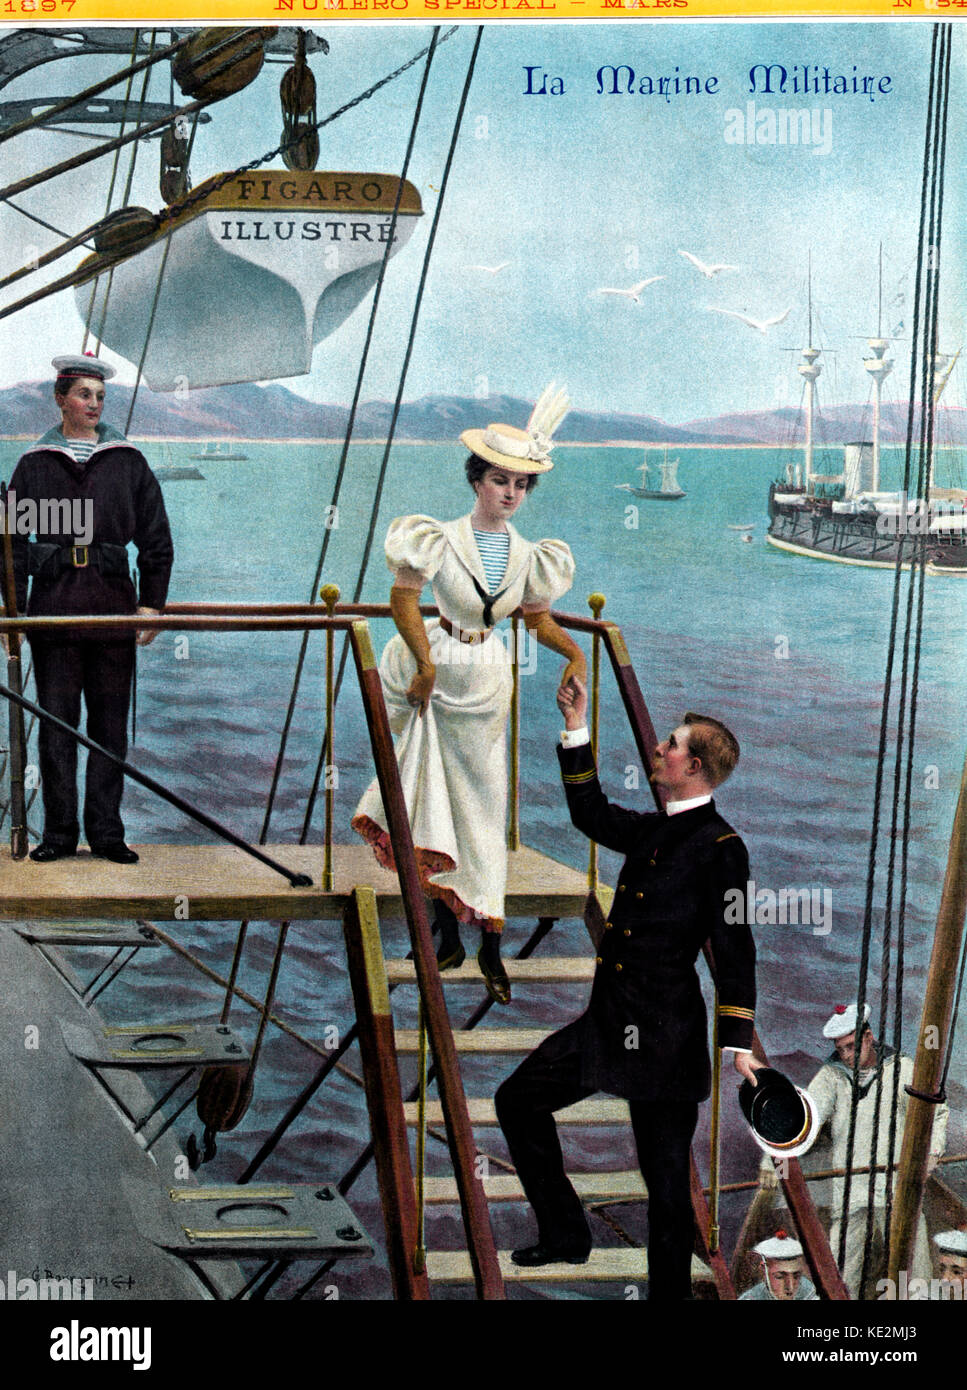 Young woman boarding a ship with the help of the captain.  Cover of Figaro Illustré, 'Numéro spécial', No. 84, March 1897. She is wearing a typical late 19th century dress with leg of mutton sleeves, with gloves and a hat.  The captain, wearing his uniform, has taken off his hat as he helps her onto the ship.  Sailors in uniform on boat.  Caption reads 'La Marine Militaire'.   Illustration by Gustave Bourgain (1856-1919).  Navy Stock Photo